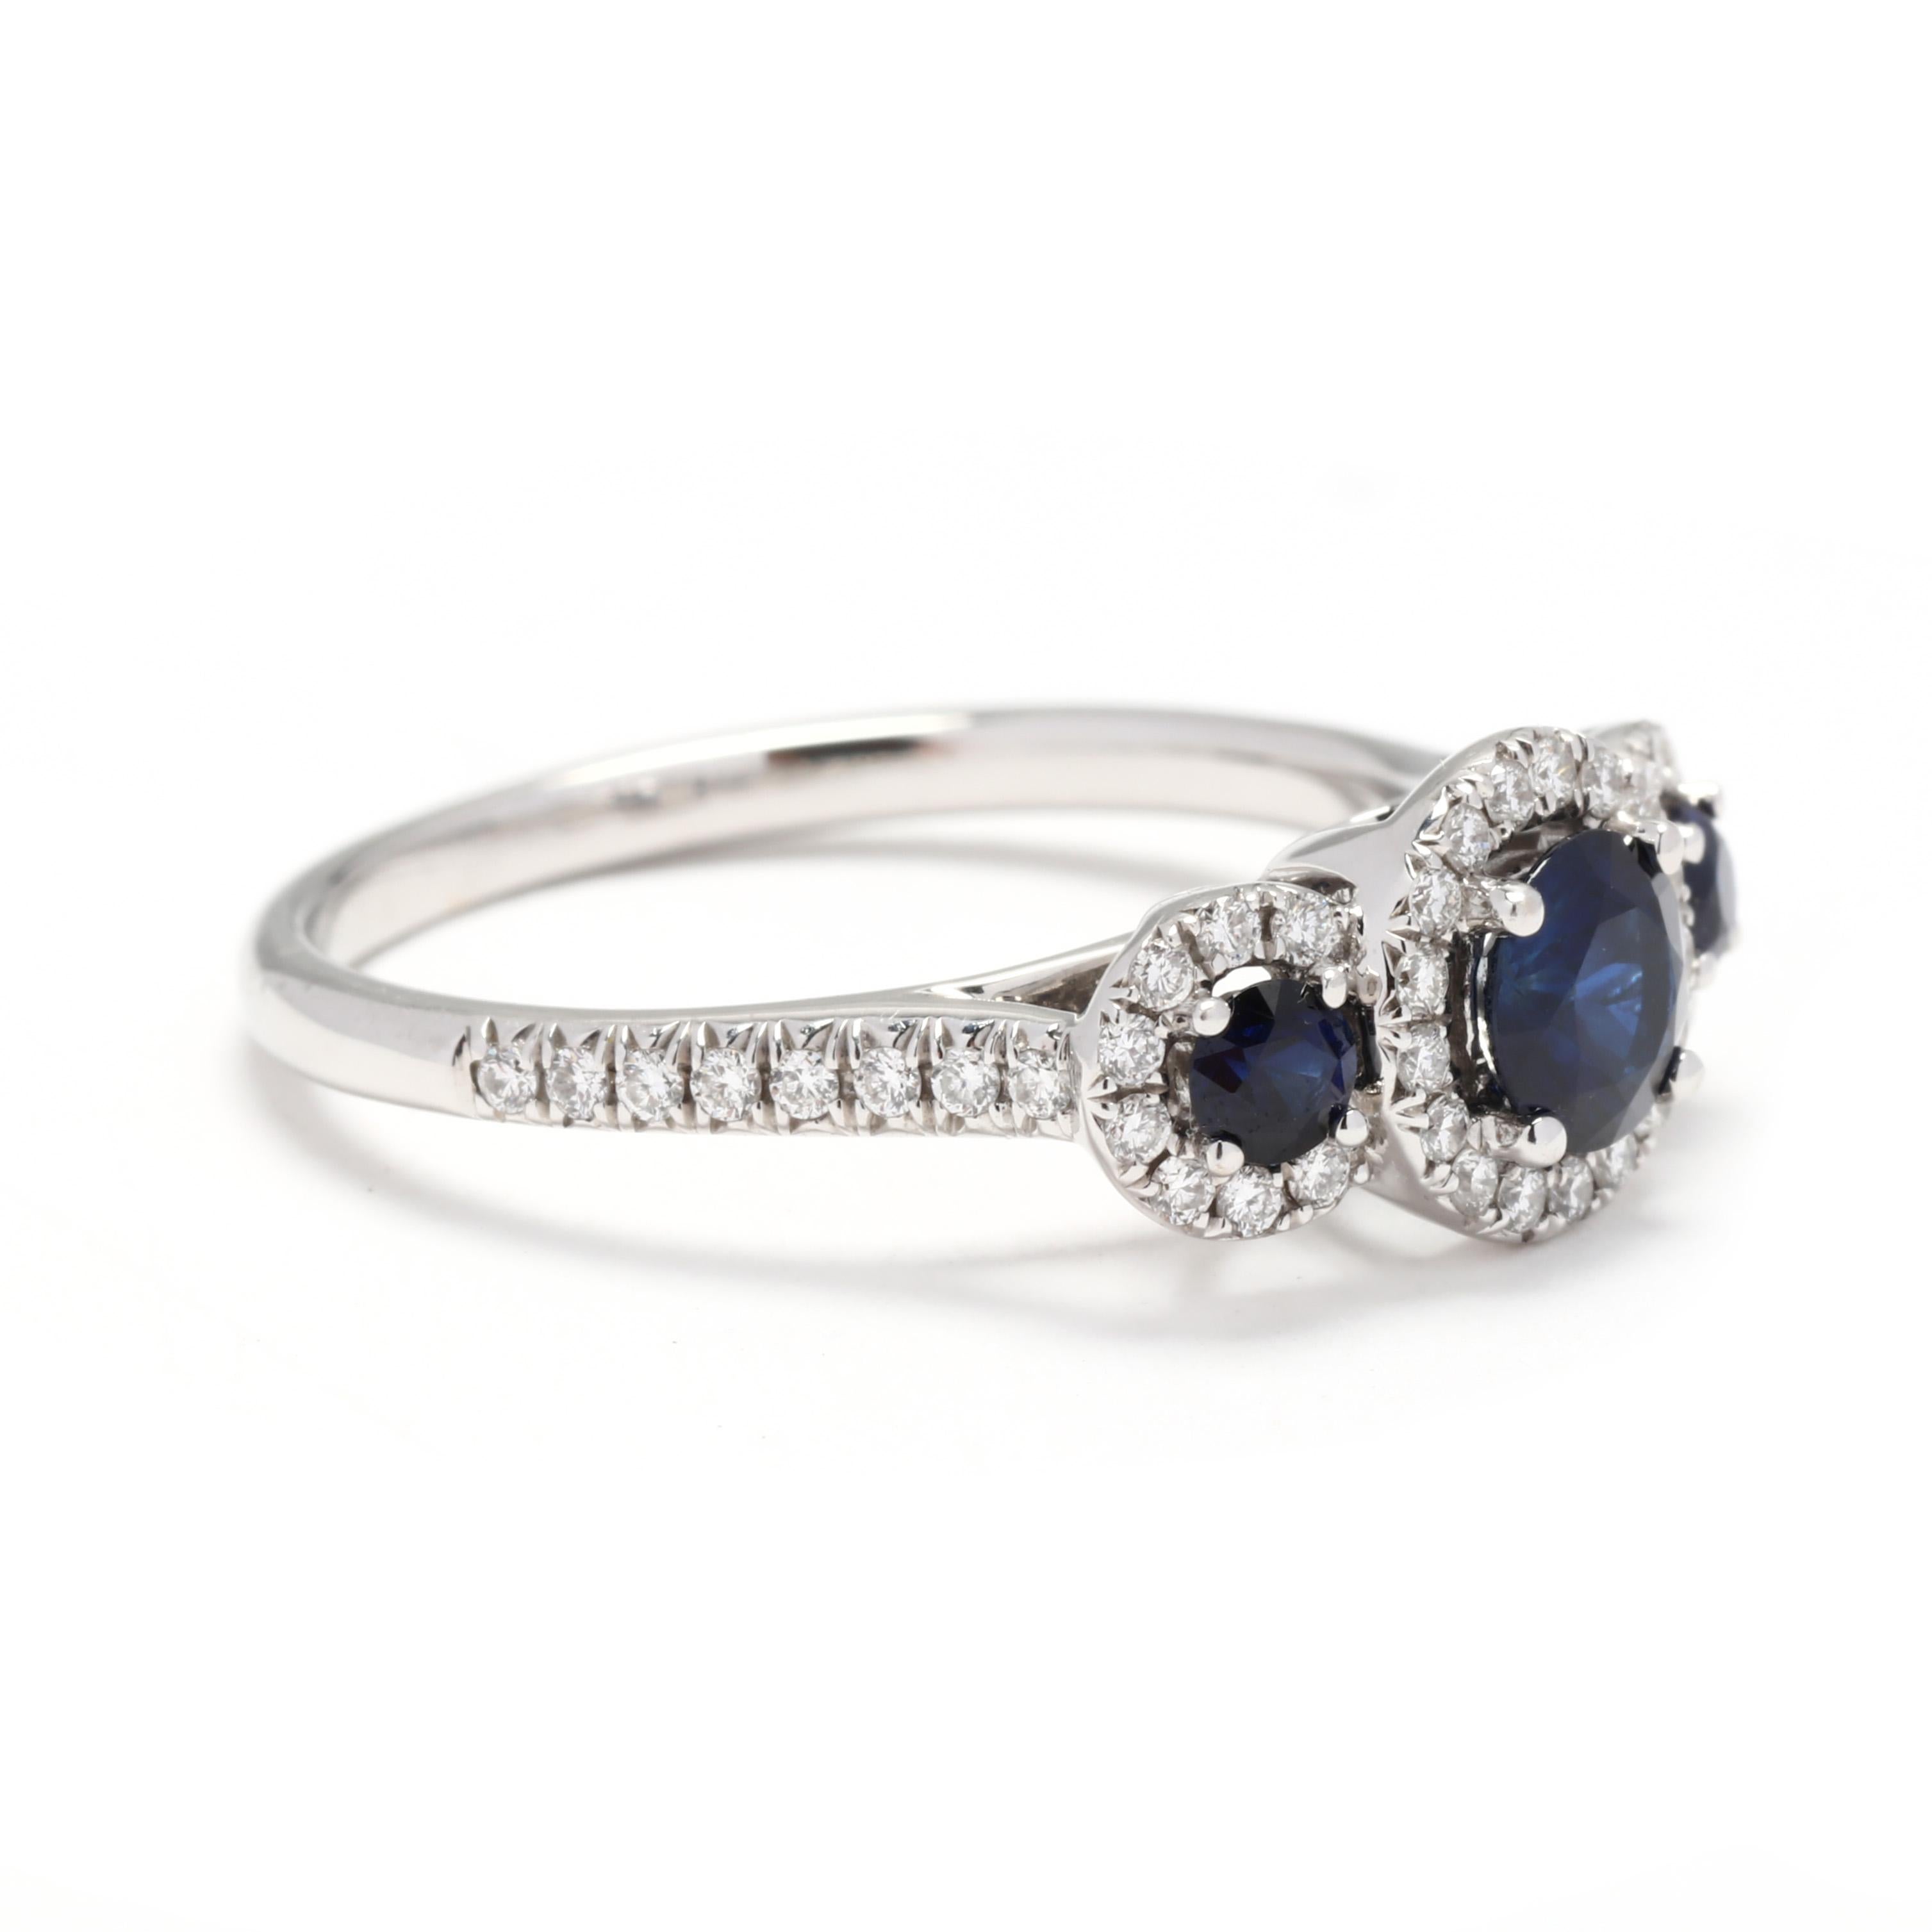 A 14 karat white gold natural sapphire and diamond three stone engagement ring. This ring features three round cut natural blue sapphires weighing approximately 1 total carat, each with a halo of round brilliant cut diamonds and diamonds down the